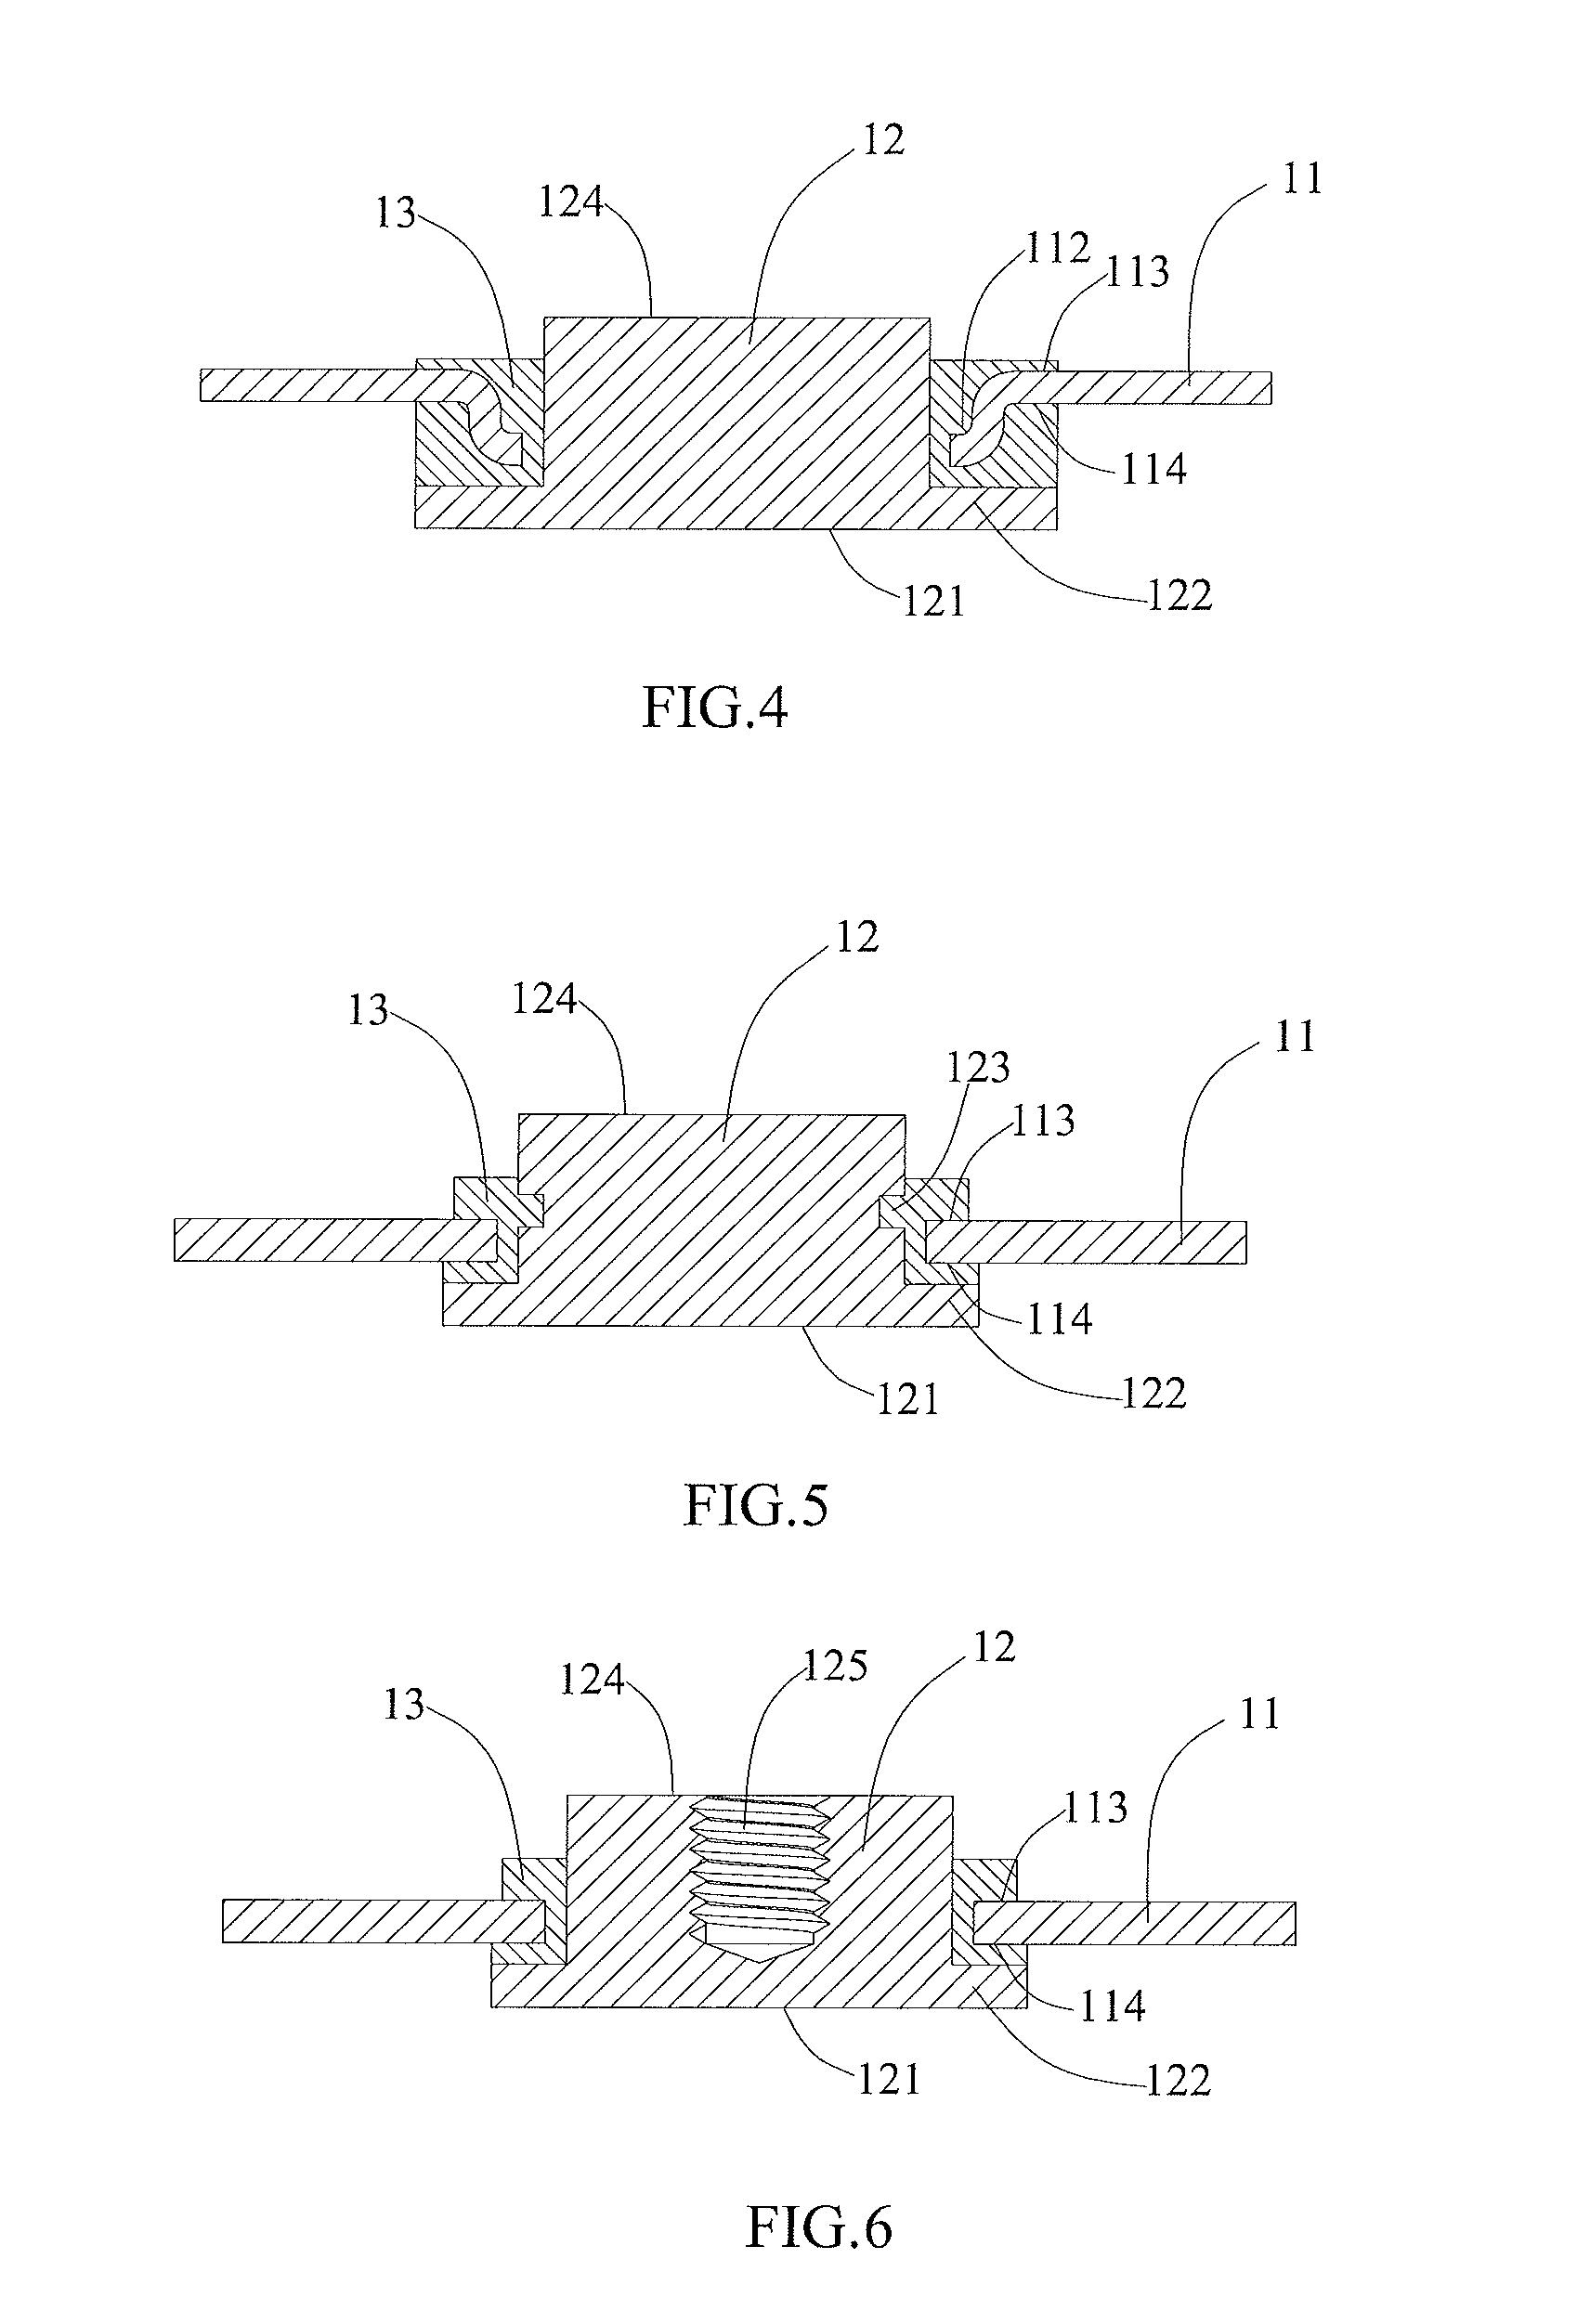 Through Connecting Piece, Power Battery And Cap Assembly Thereof